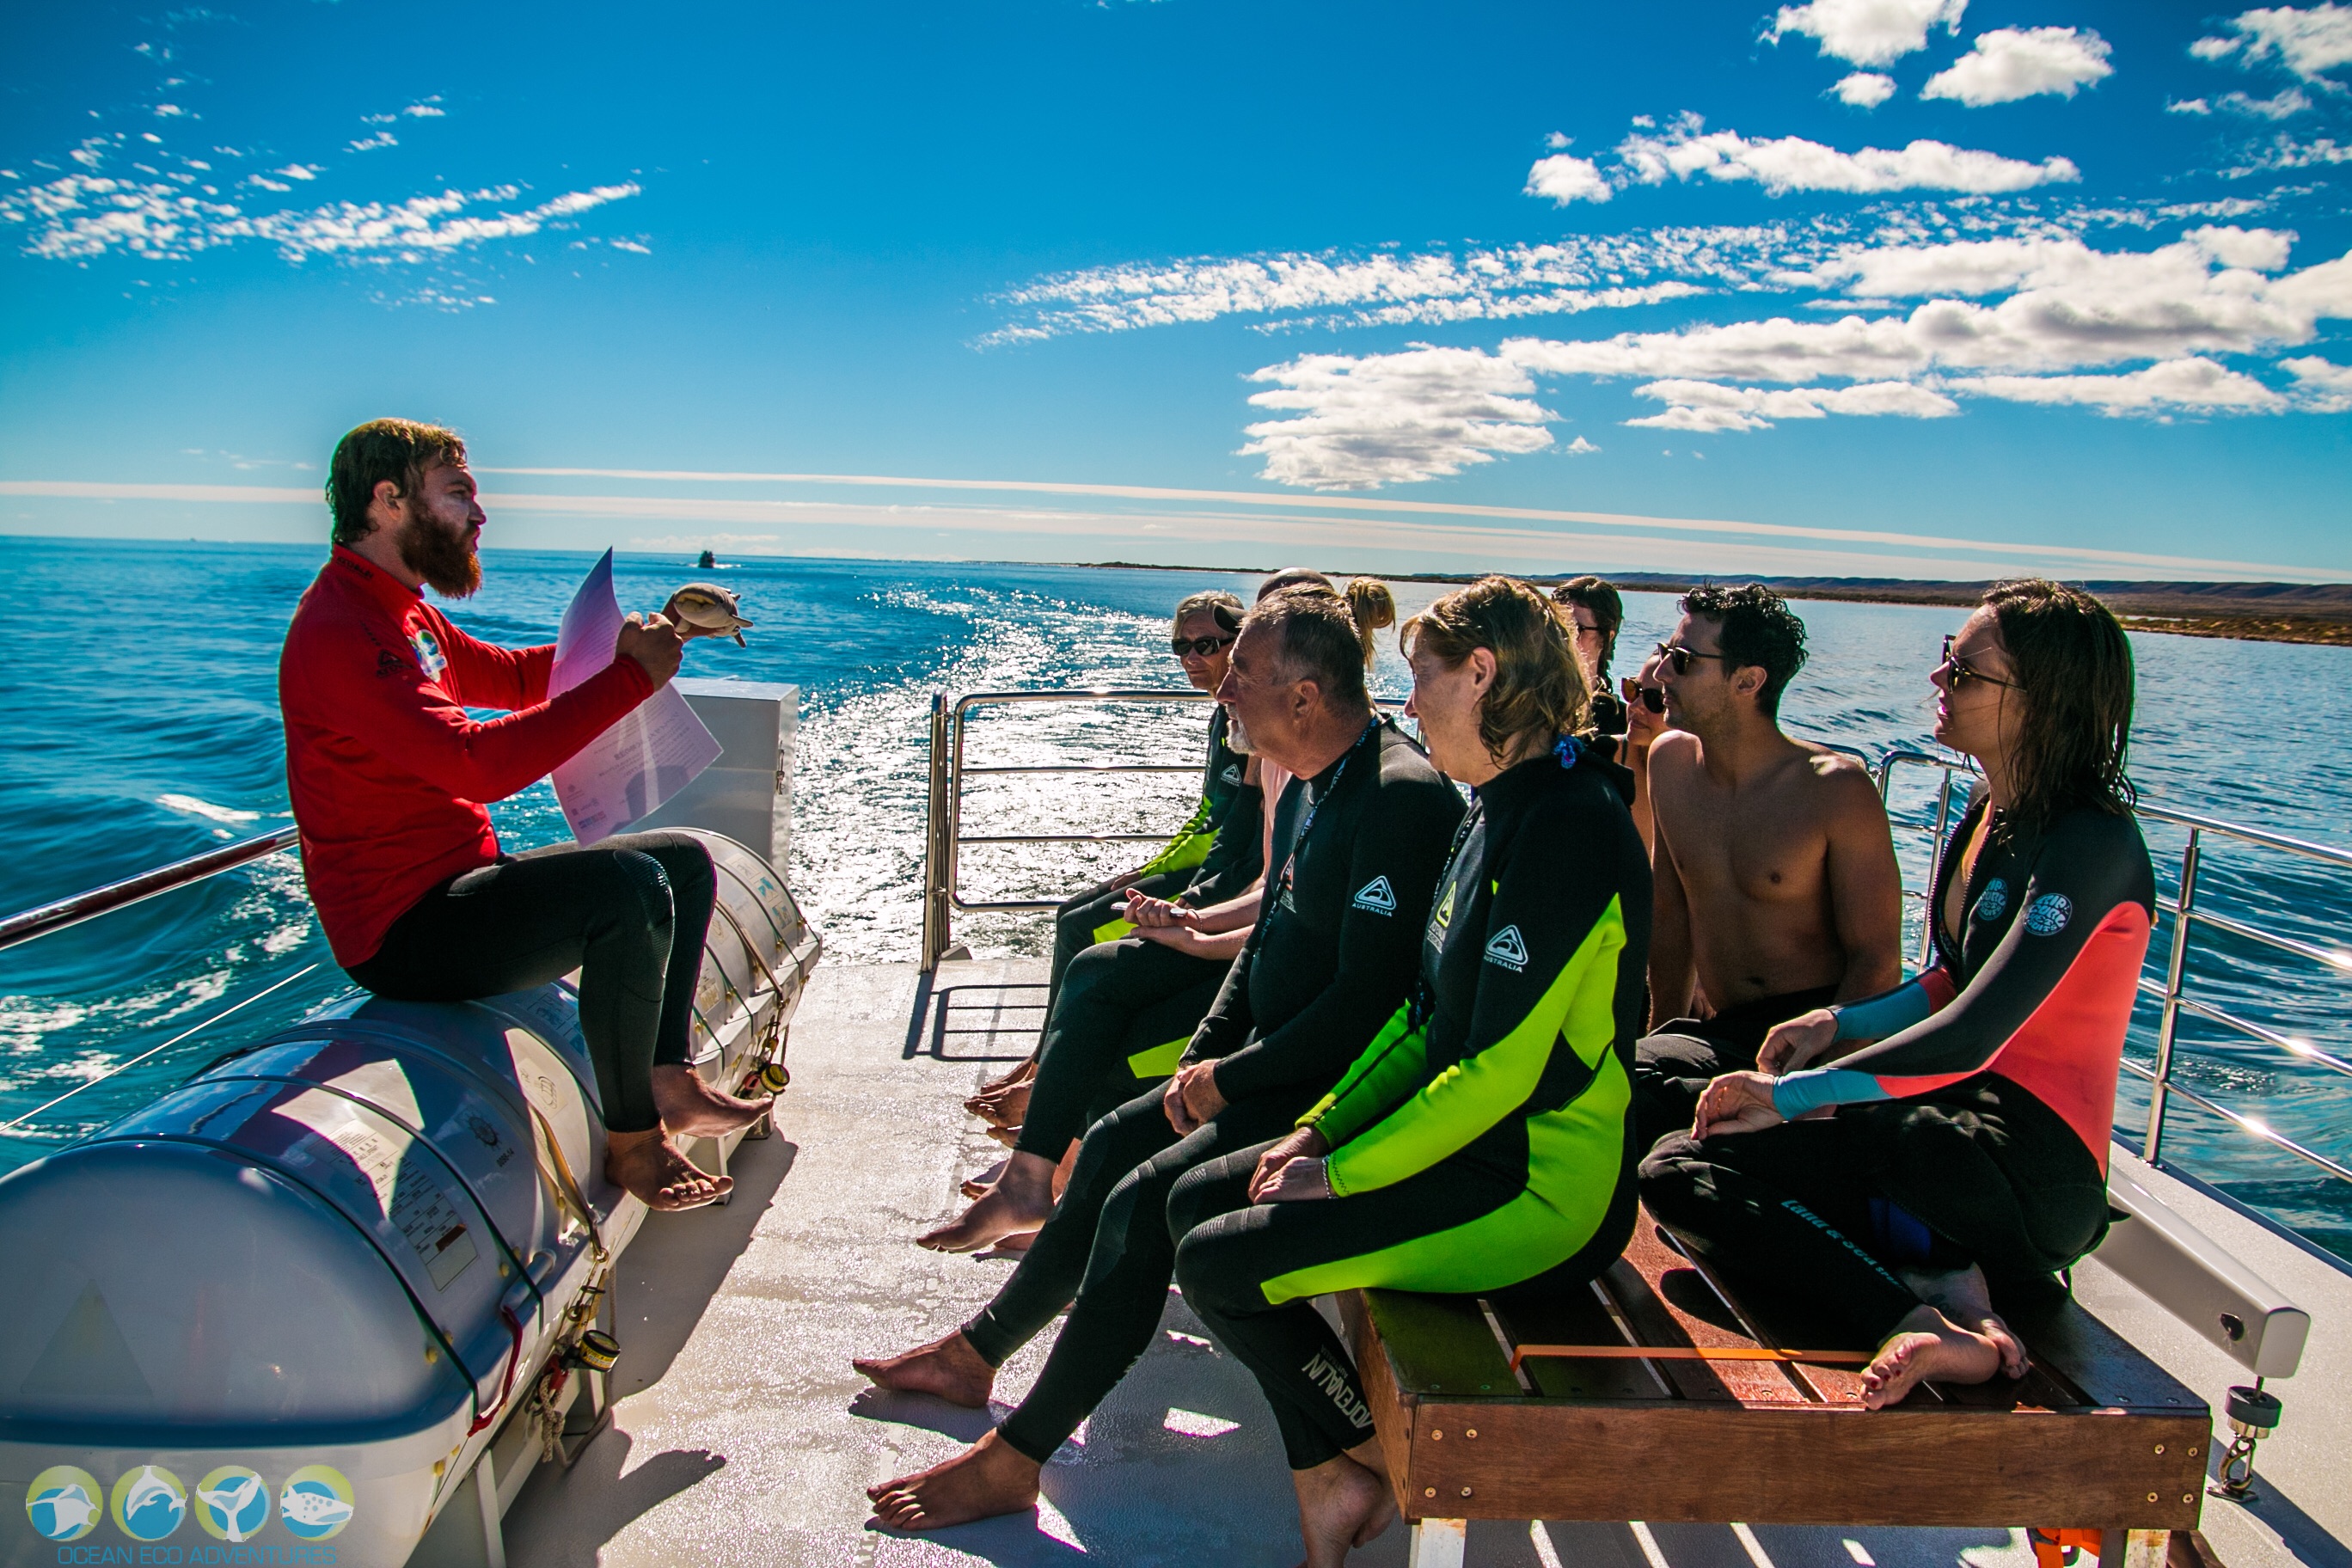 Review Of Ocean Eco Adventures Whale Shark Tour, Exmouth Western Australia.